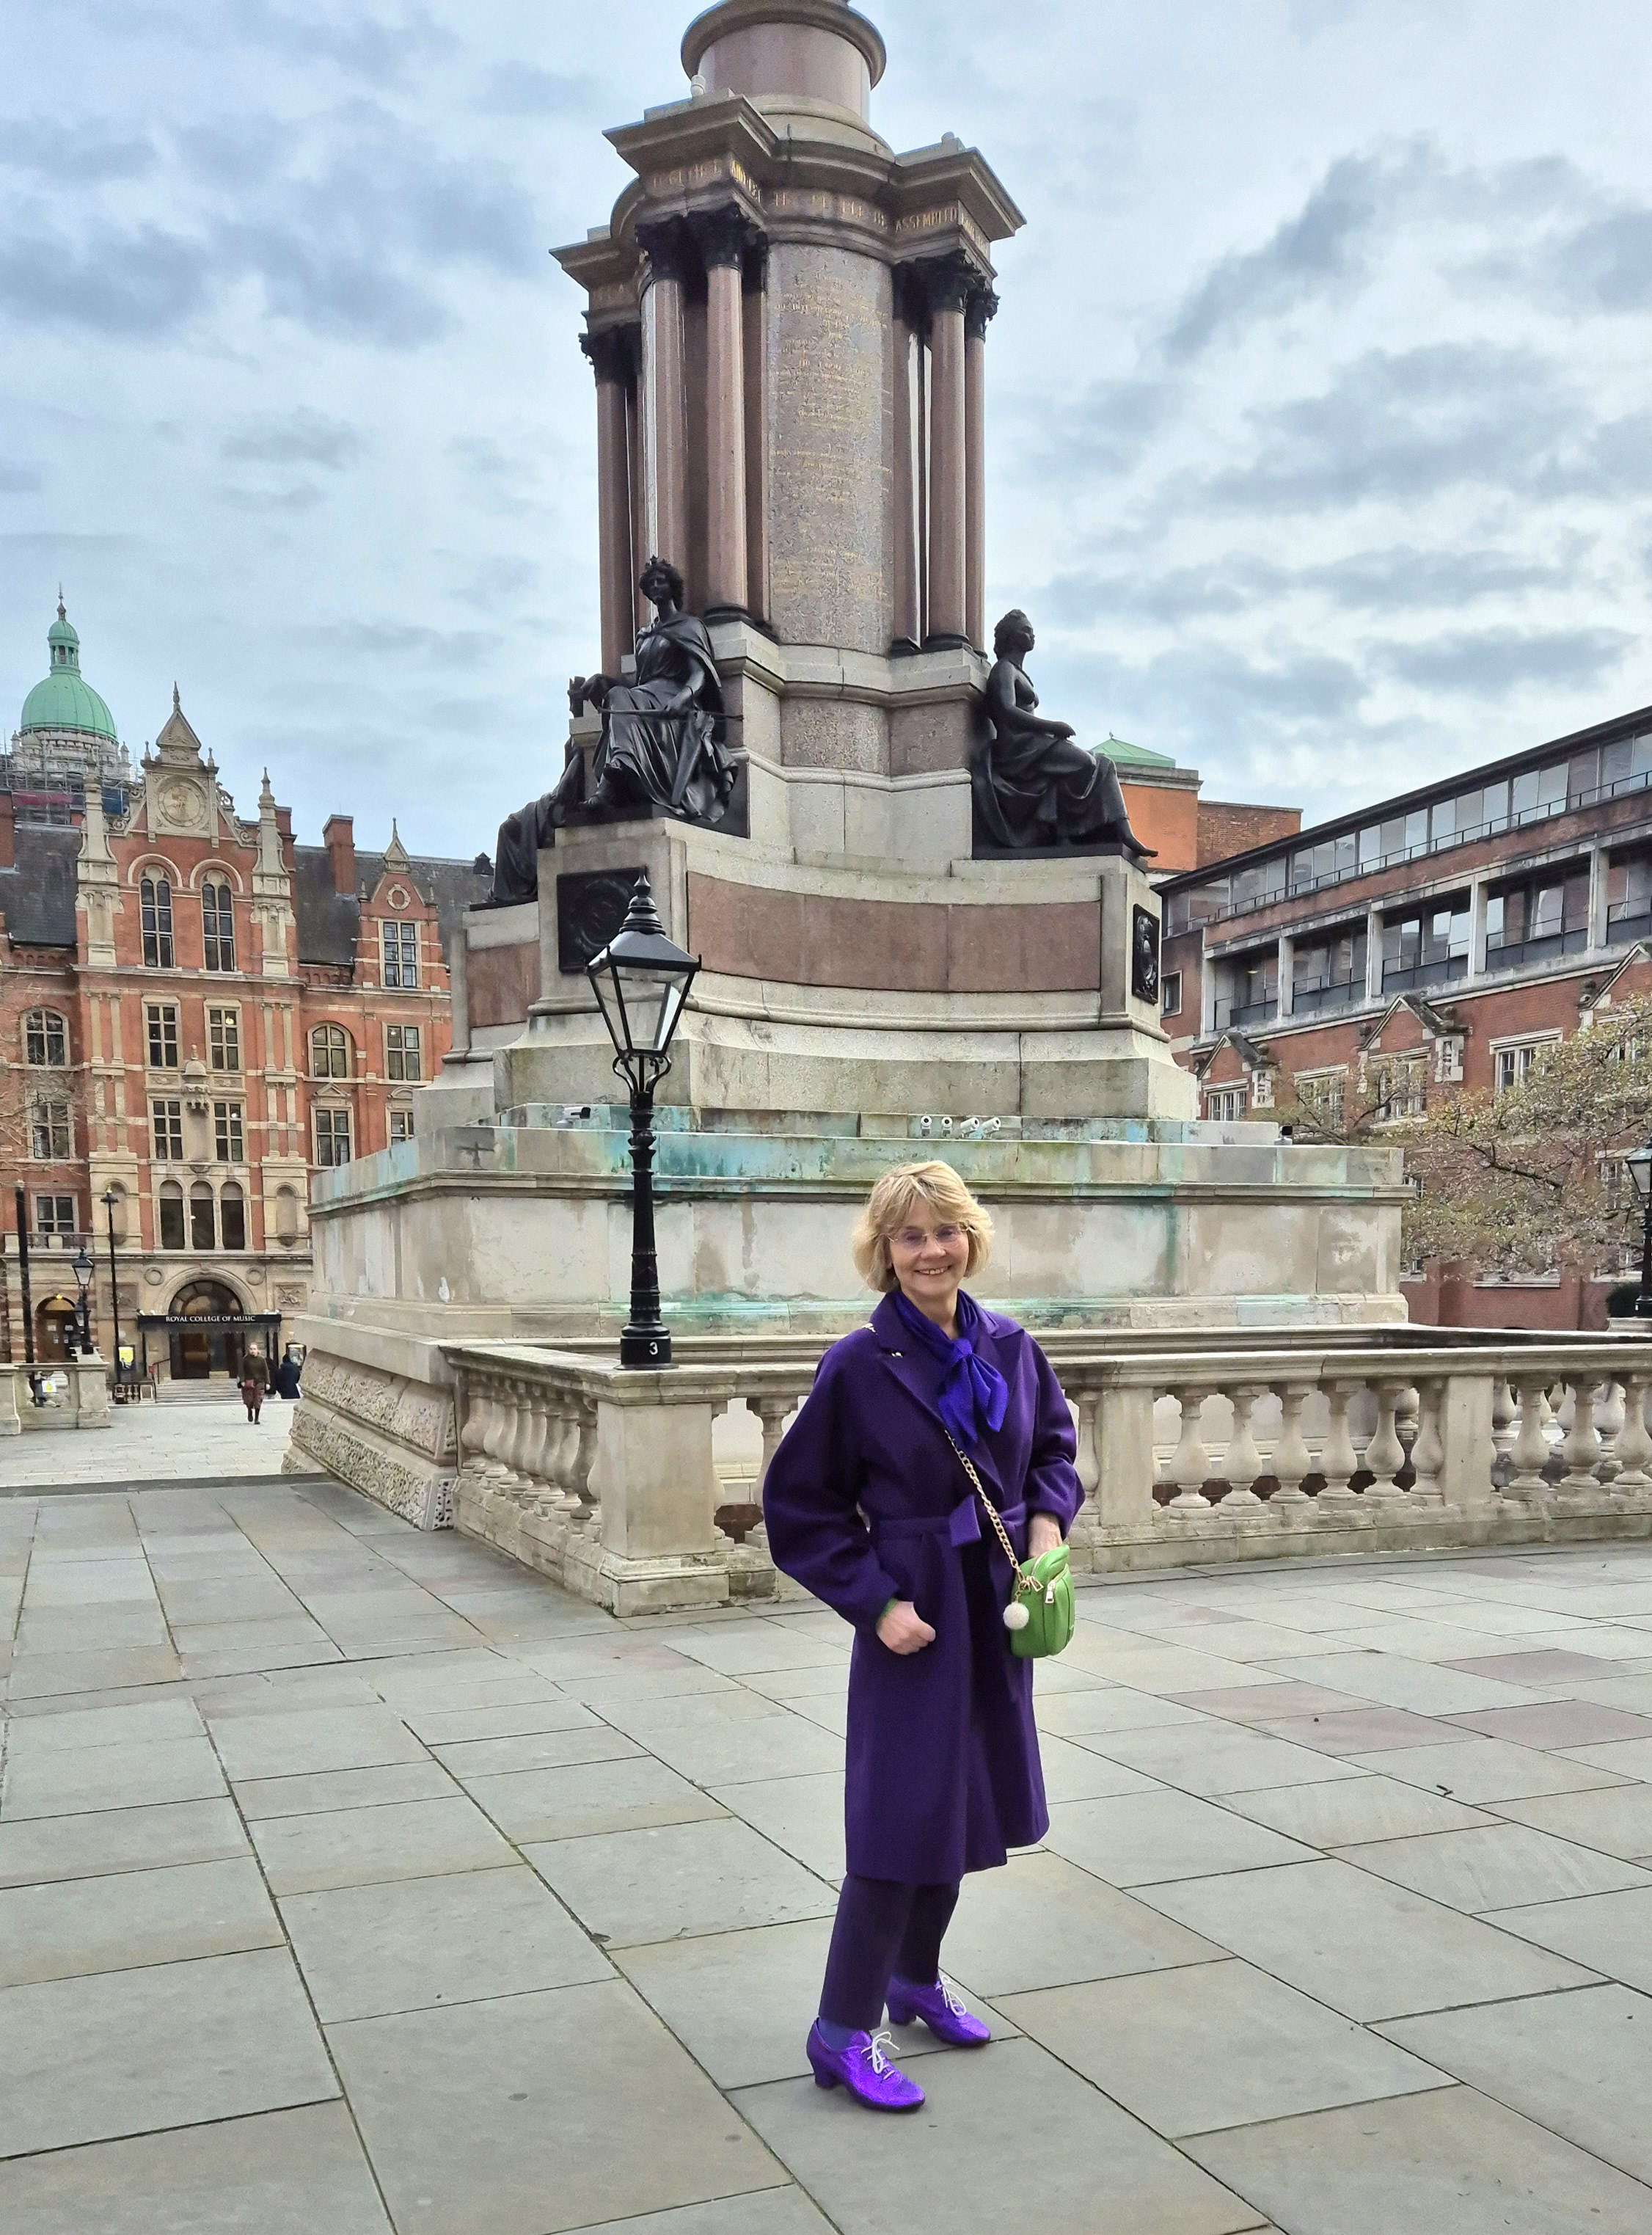 Is This Mutton blogger Gail Hanlon in purple with green accessories at the Royal Albert Hall, London